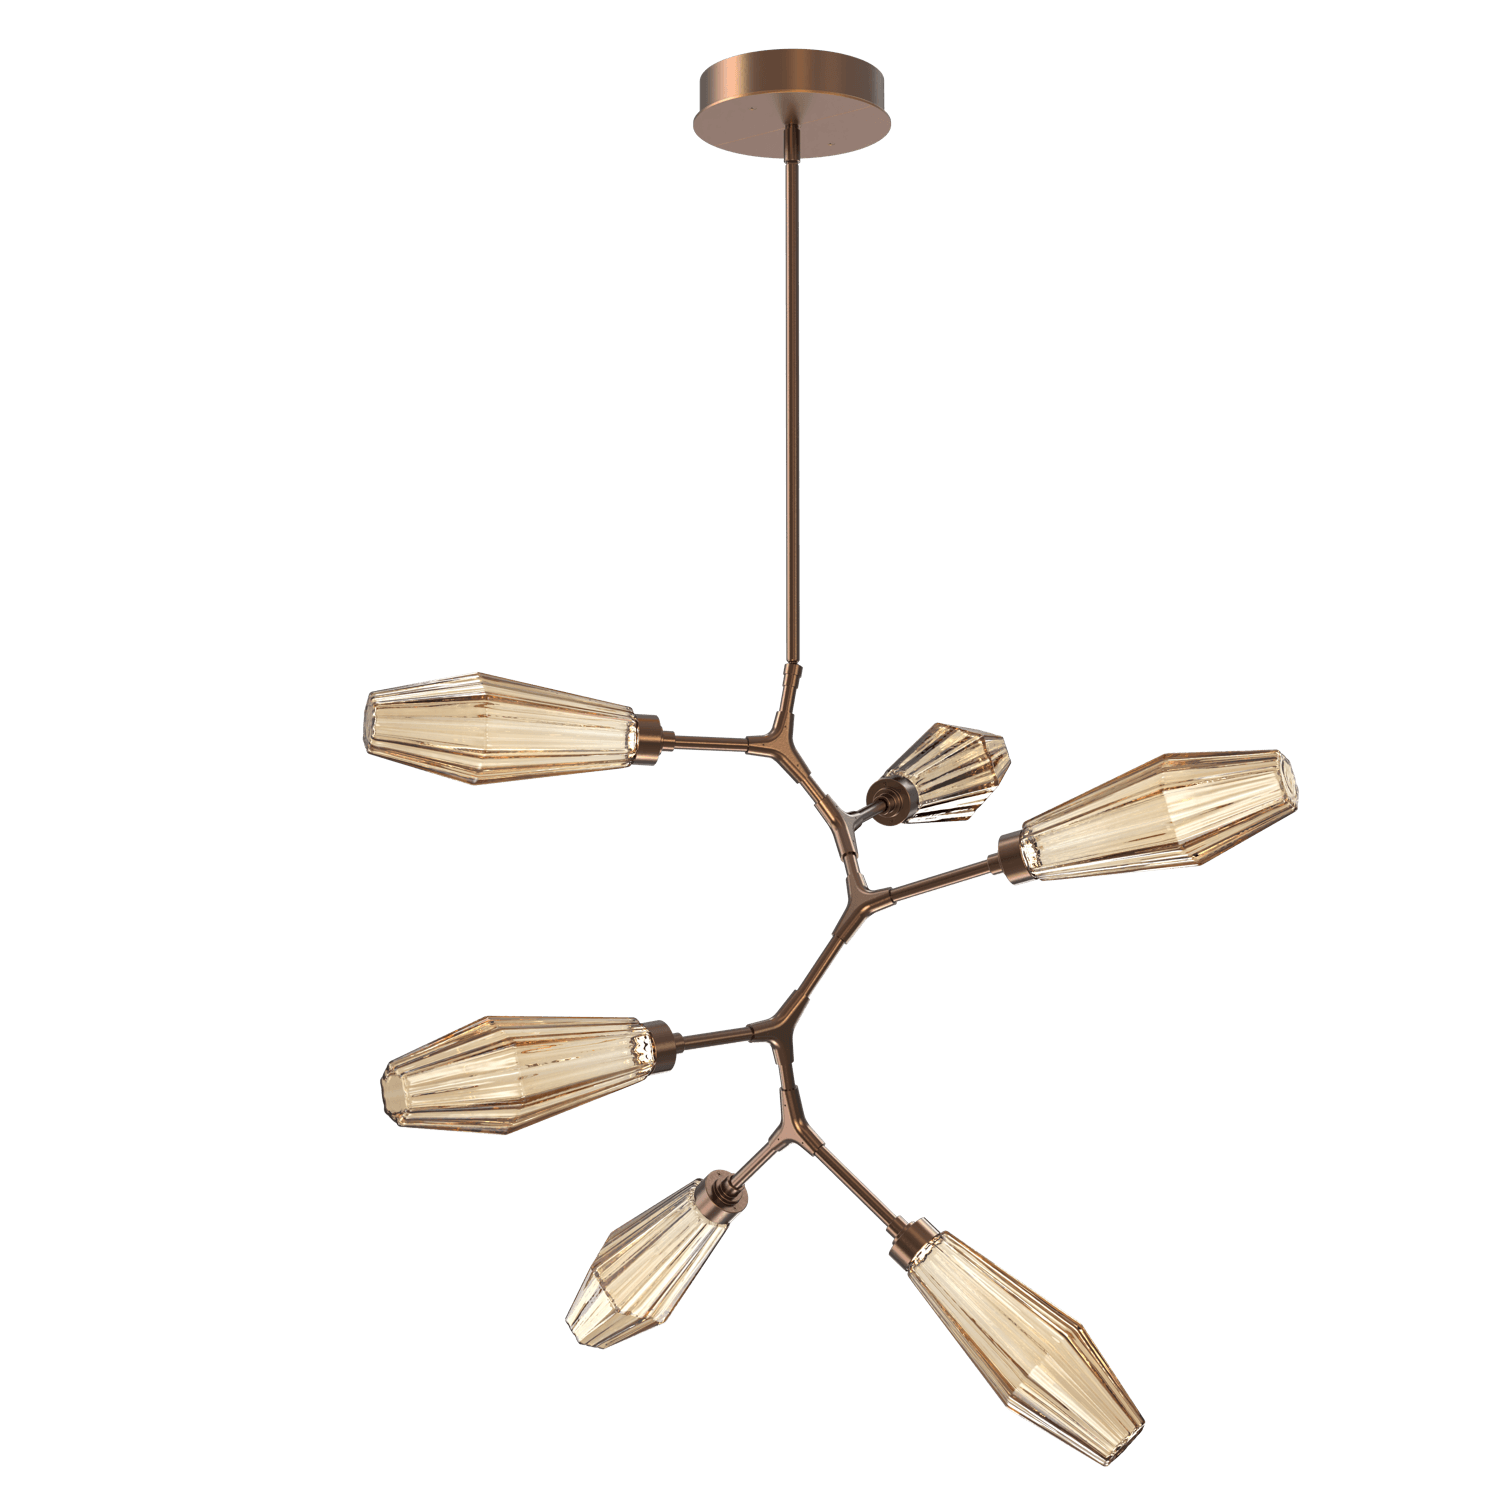 CHB0049-VA-BB-RB-Hammerton-Studio-Aalto-6-light-modern-vine-chandelier-with-burnished-bronze-finish-and-optic-ribbed-bronze-glass-shades-and-LED-lamping